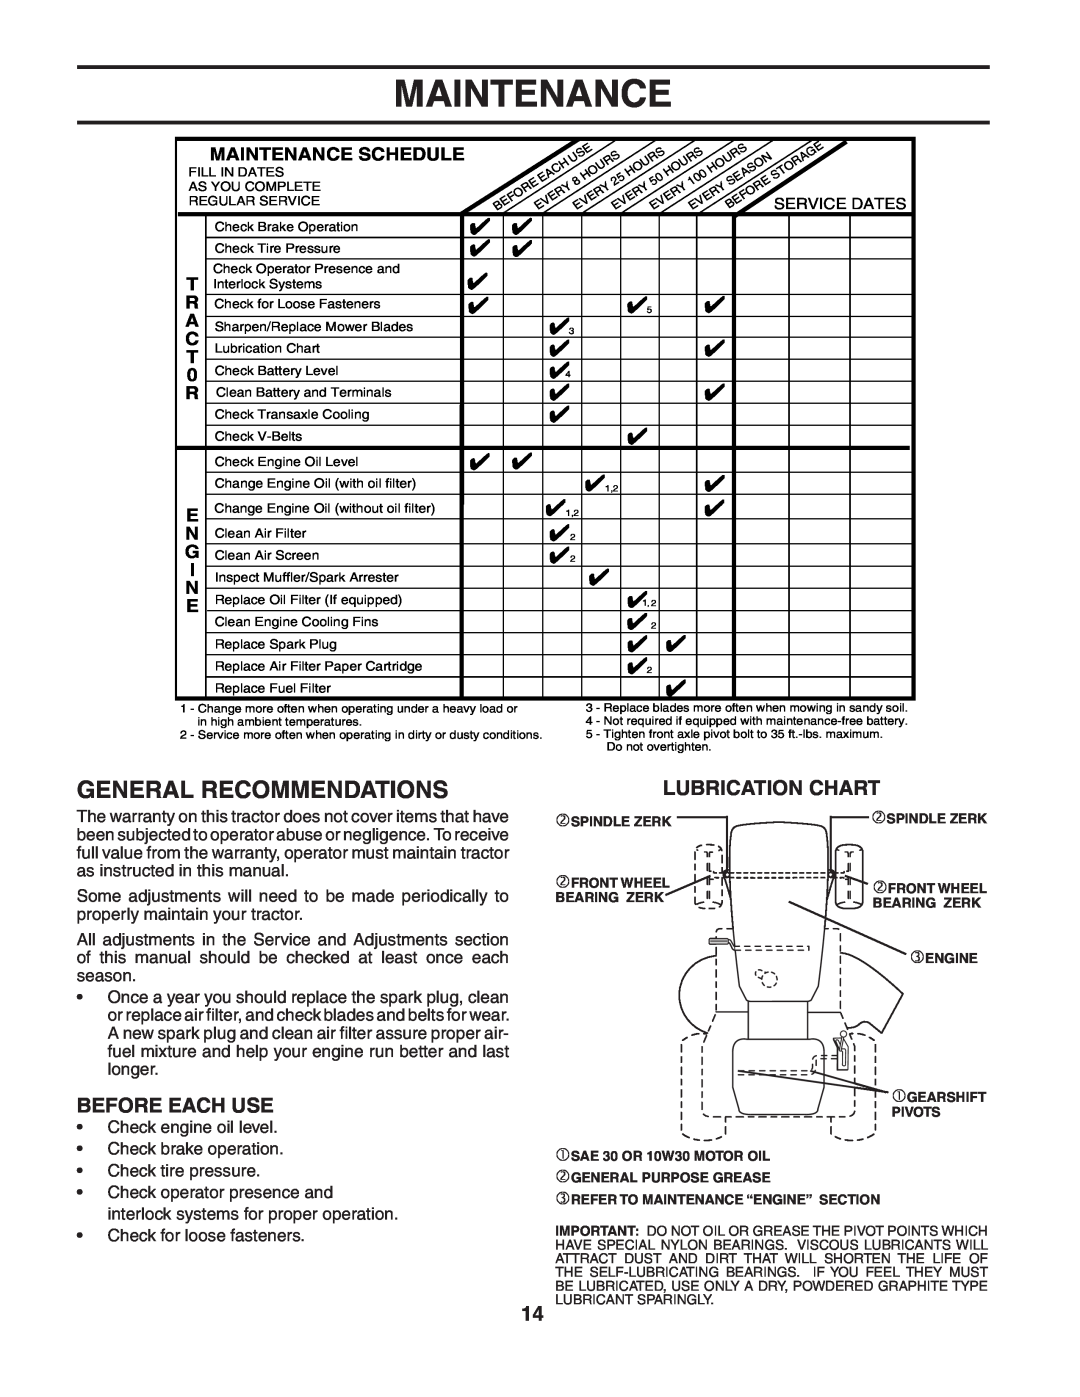 Poulan 187594 manual Maintenance, General Recommendations, Before Each Use, Lubrication Chart 